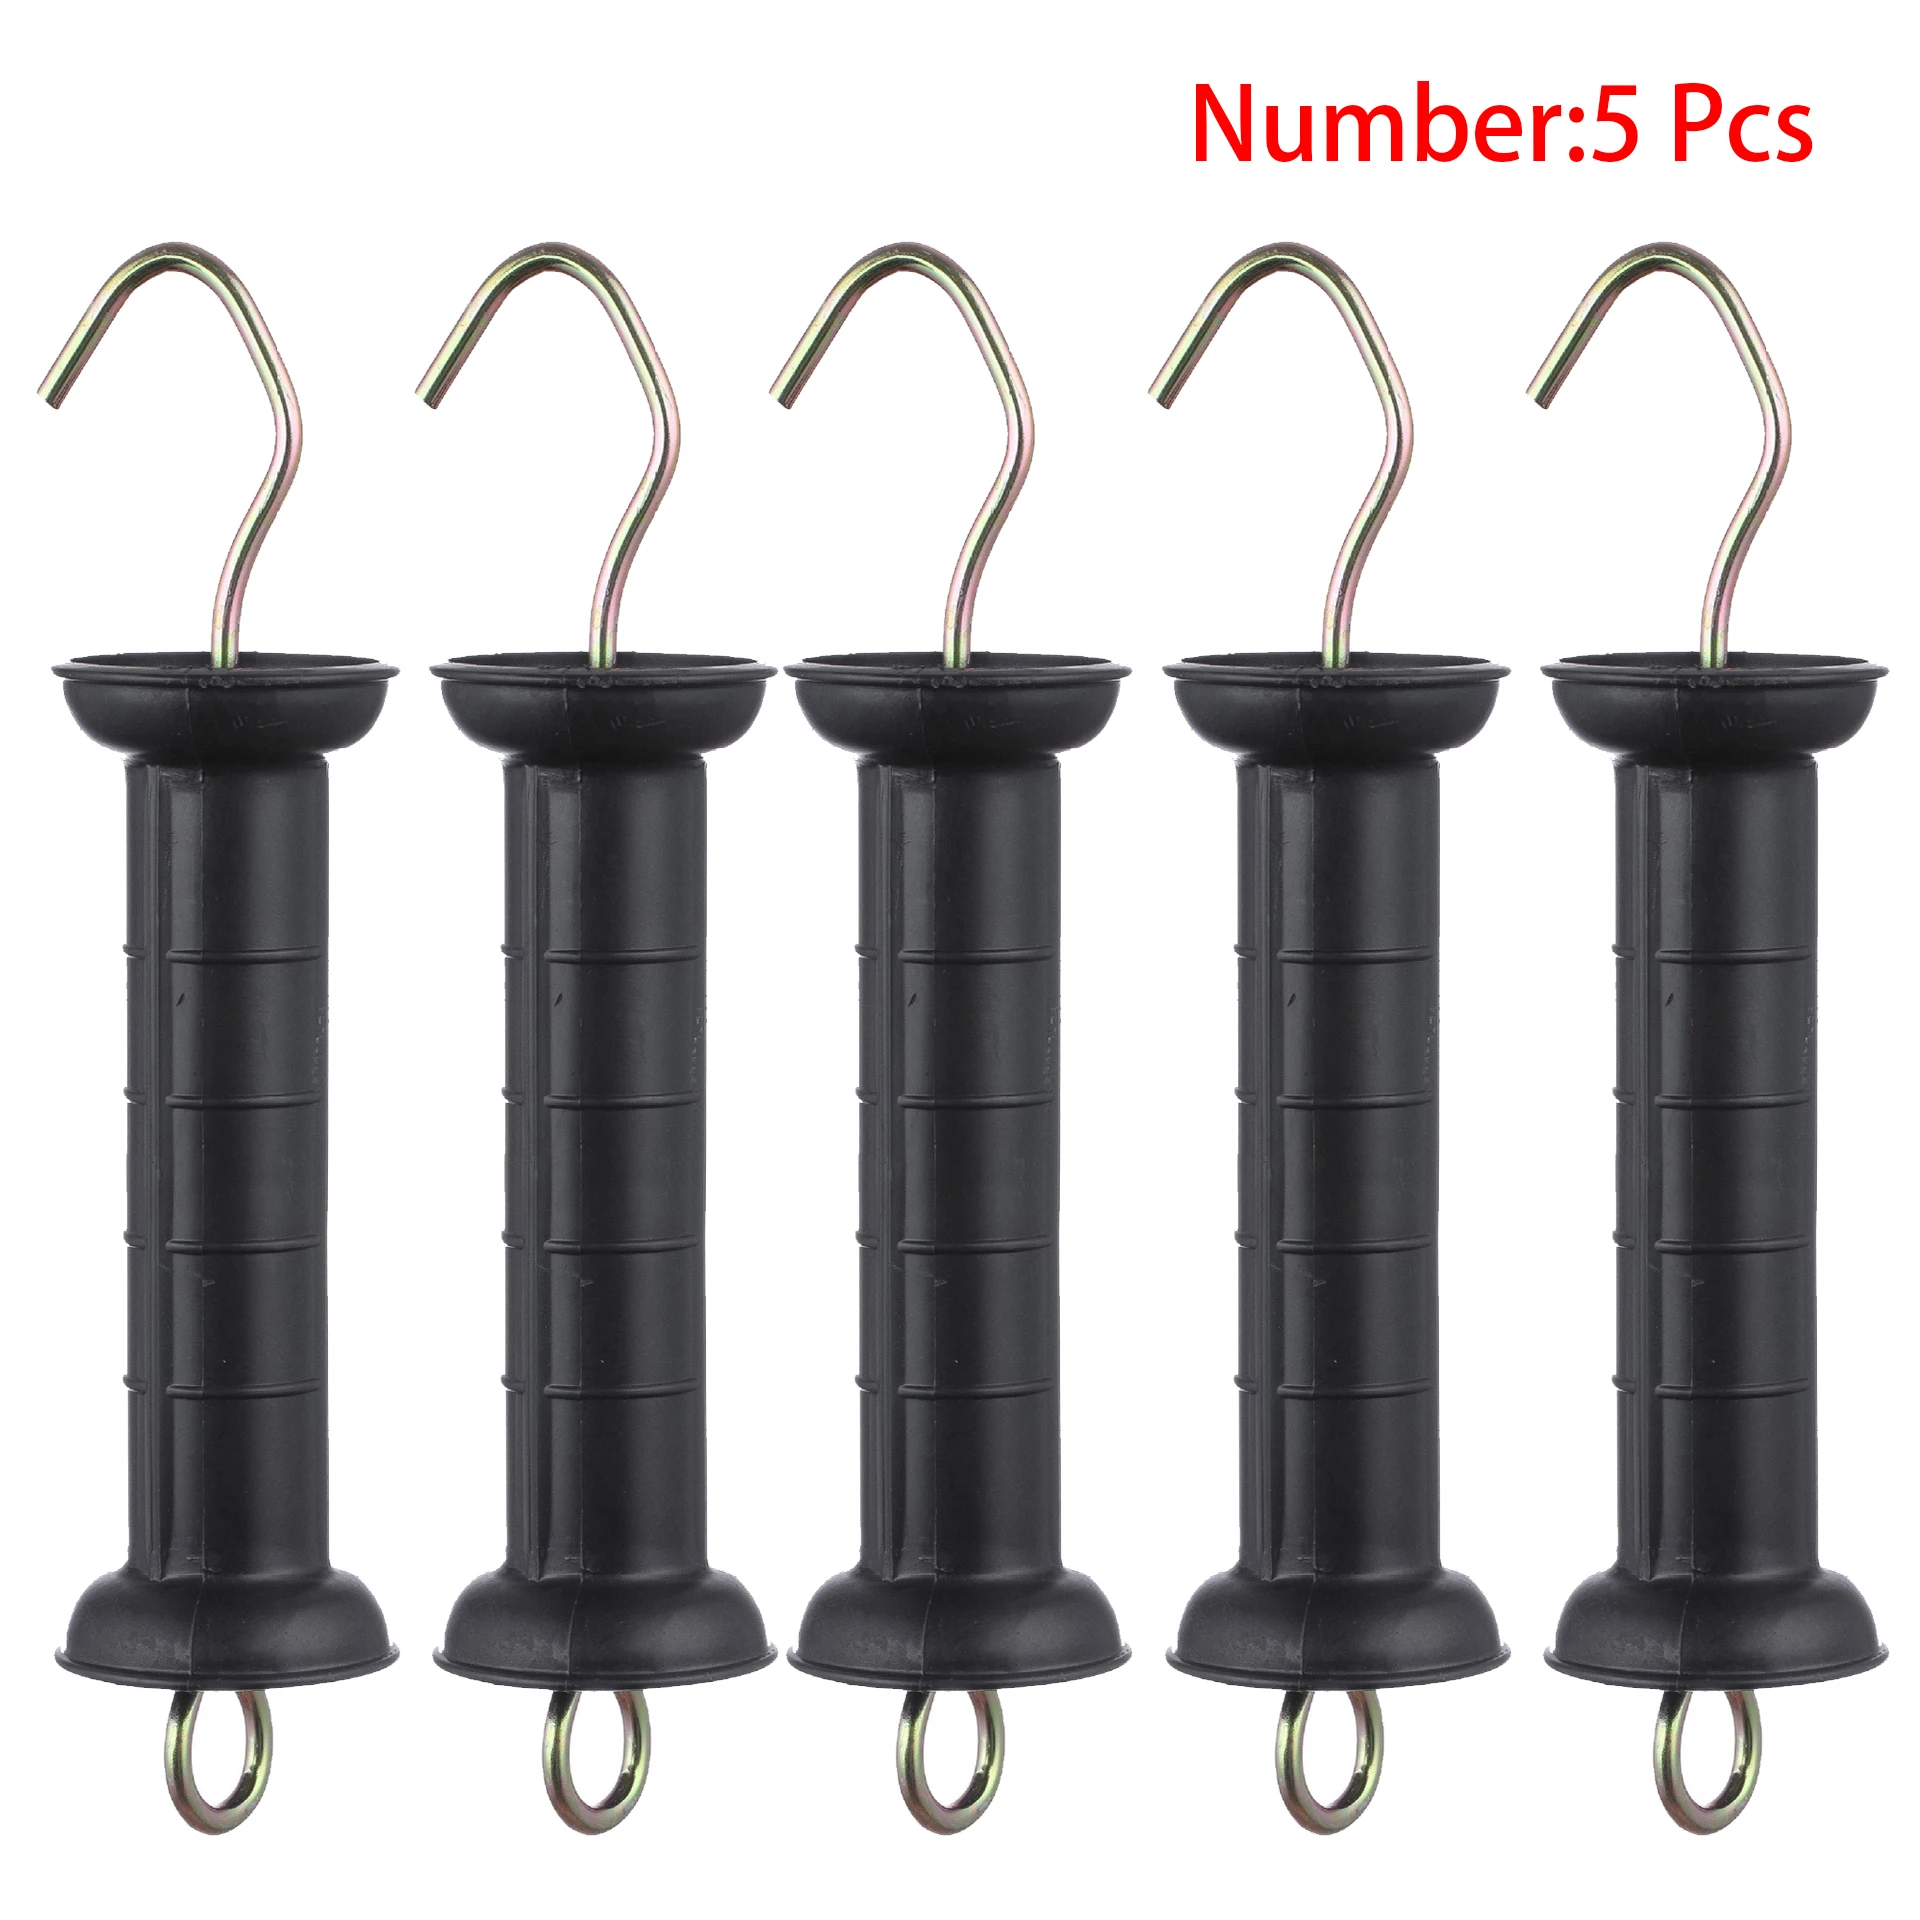 Electric Fence Gate Handles 5 Pcs Insulated Handle Of Pasture Special For Husbandry Cattle Sheep Husbandry Pasture Parts